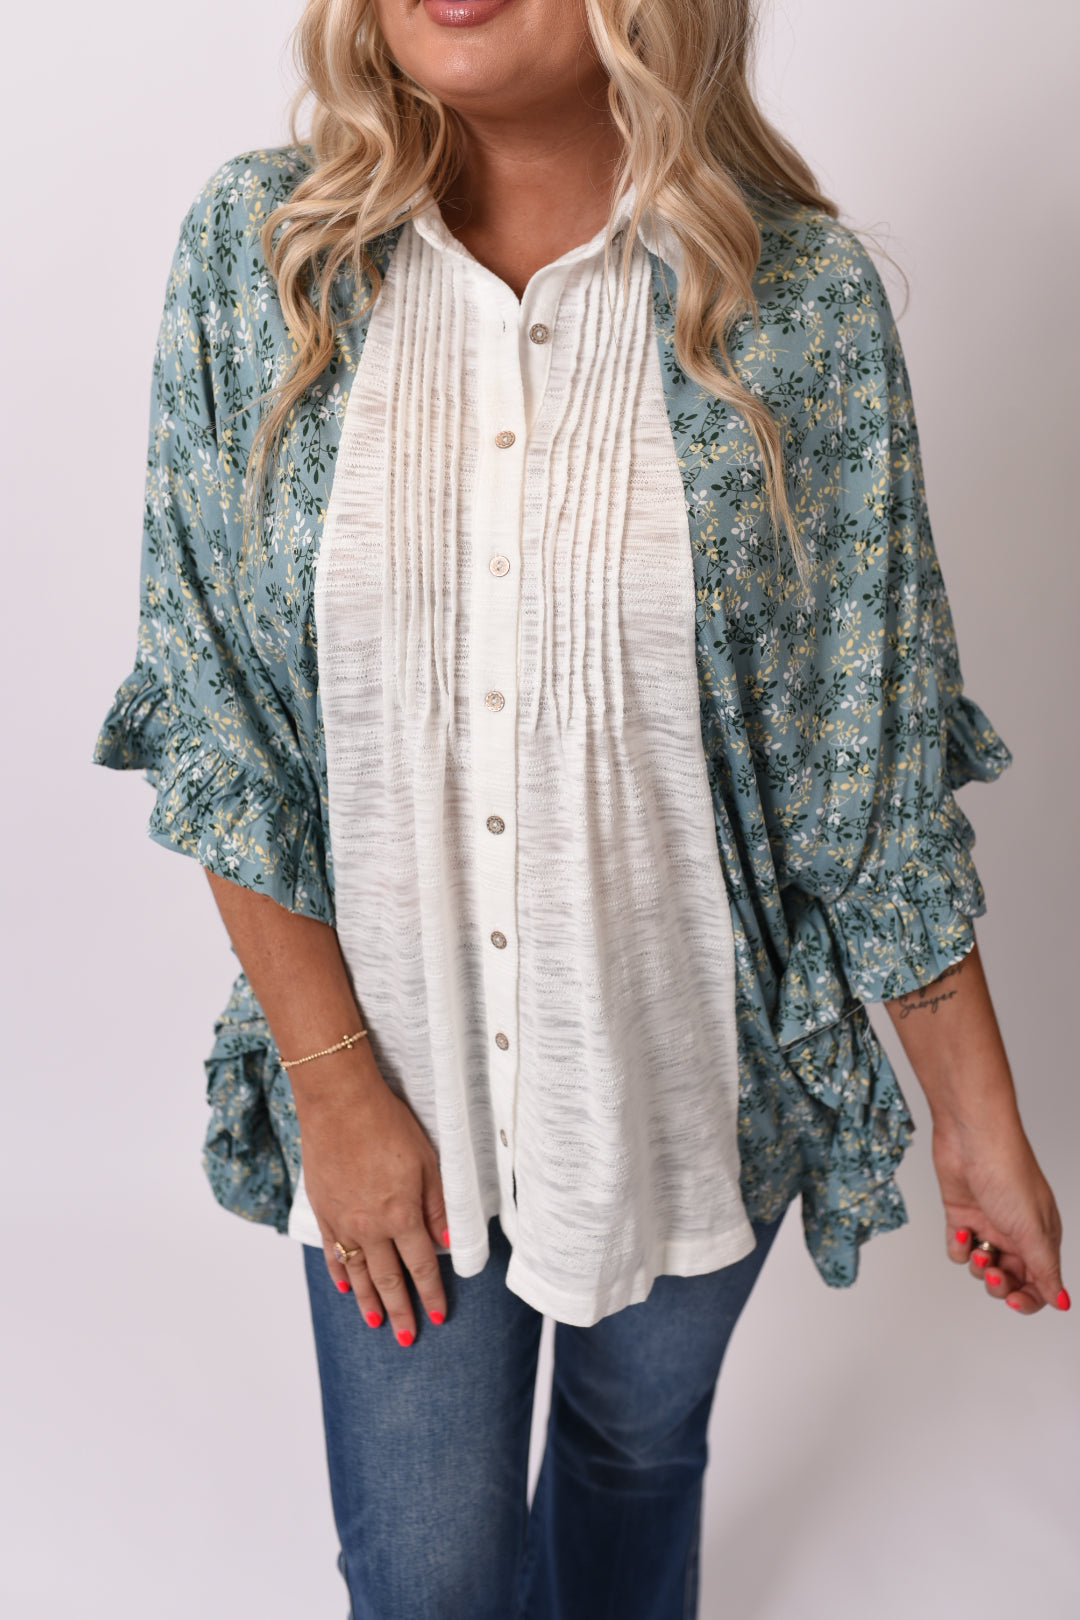 In The Mix Floral Buttoned Top